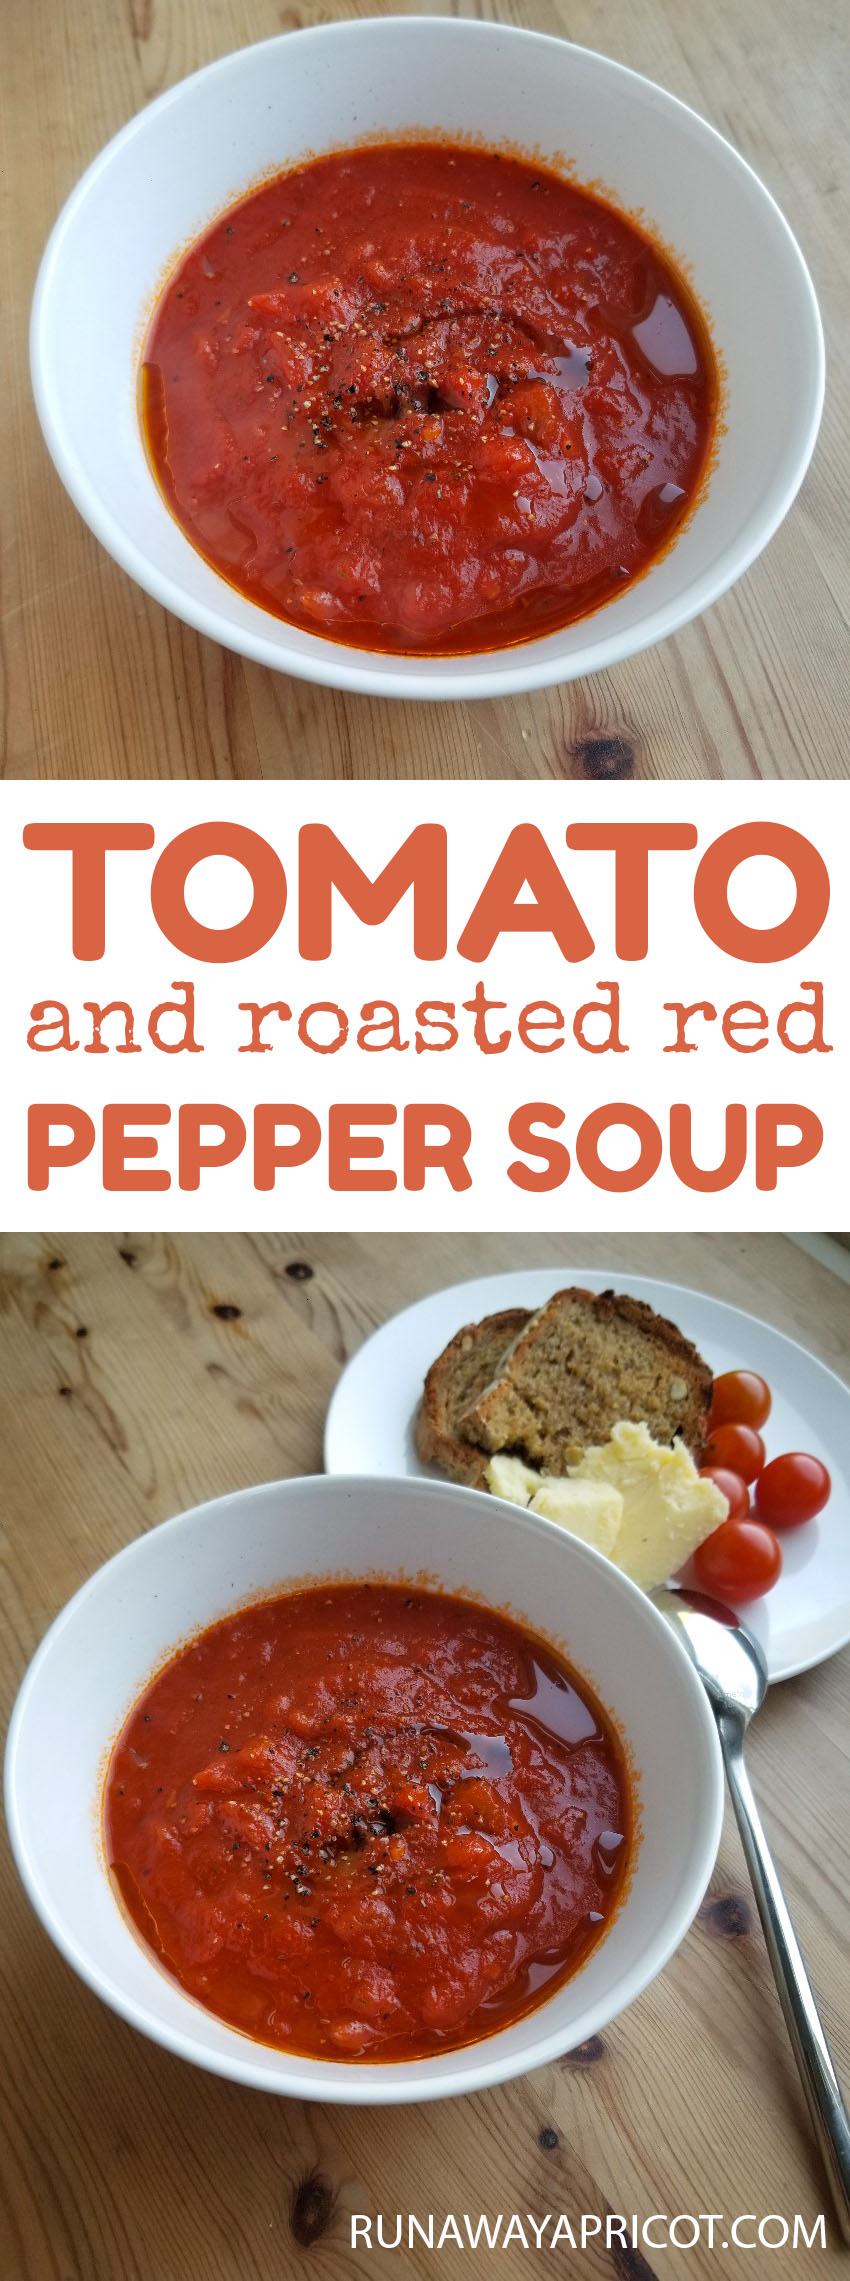 Tomato and Roasted Red Pepper Soup | Runaway Apricot